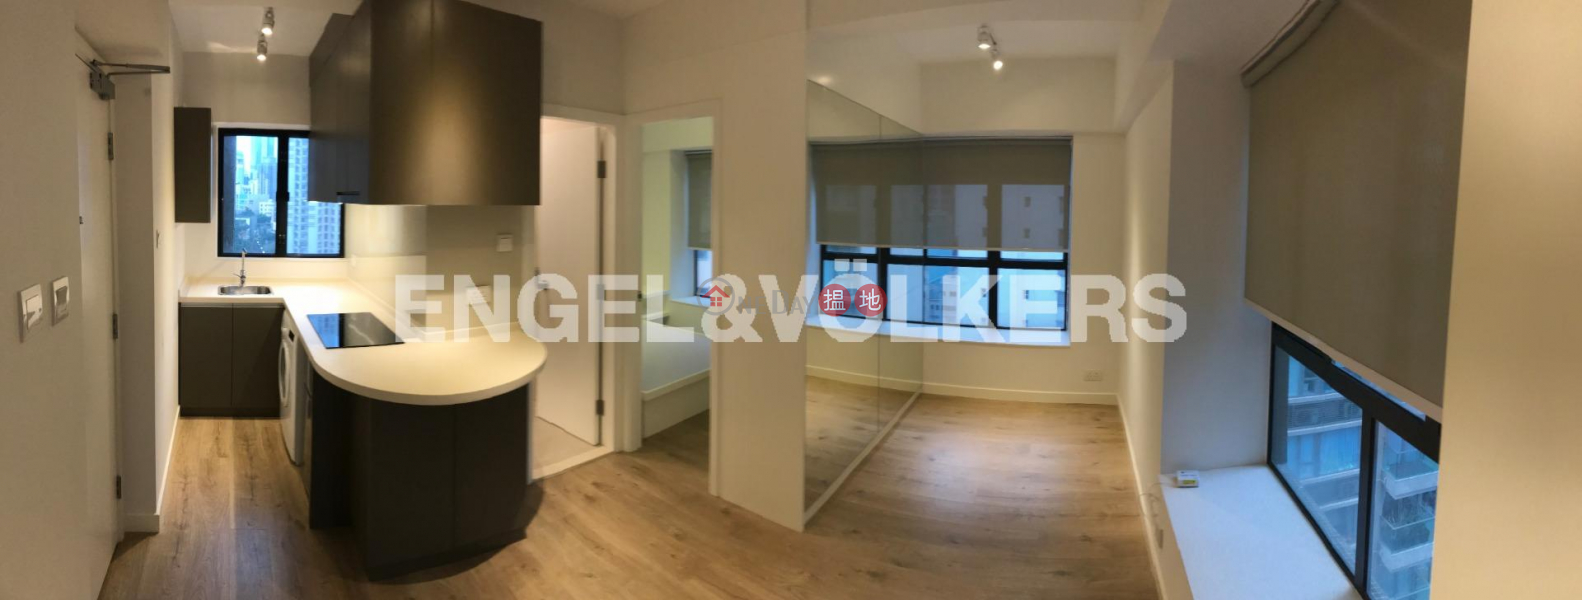 HK$ 19,500/ month, Goodwill Garden, Western District | 1 Bed Flat for Rent in Sai Ying Pun